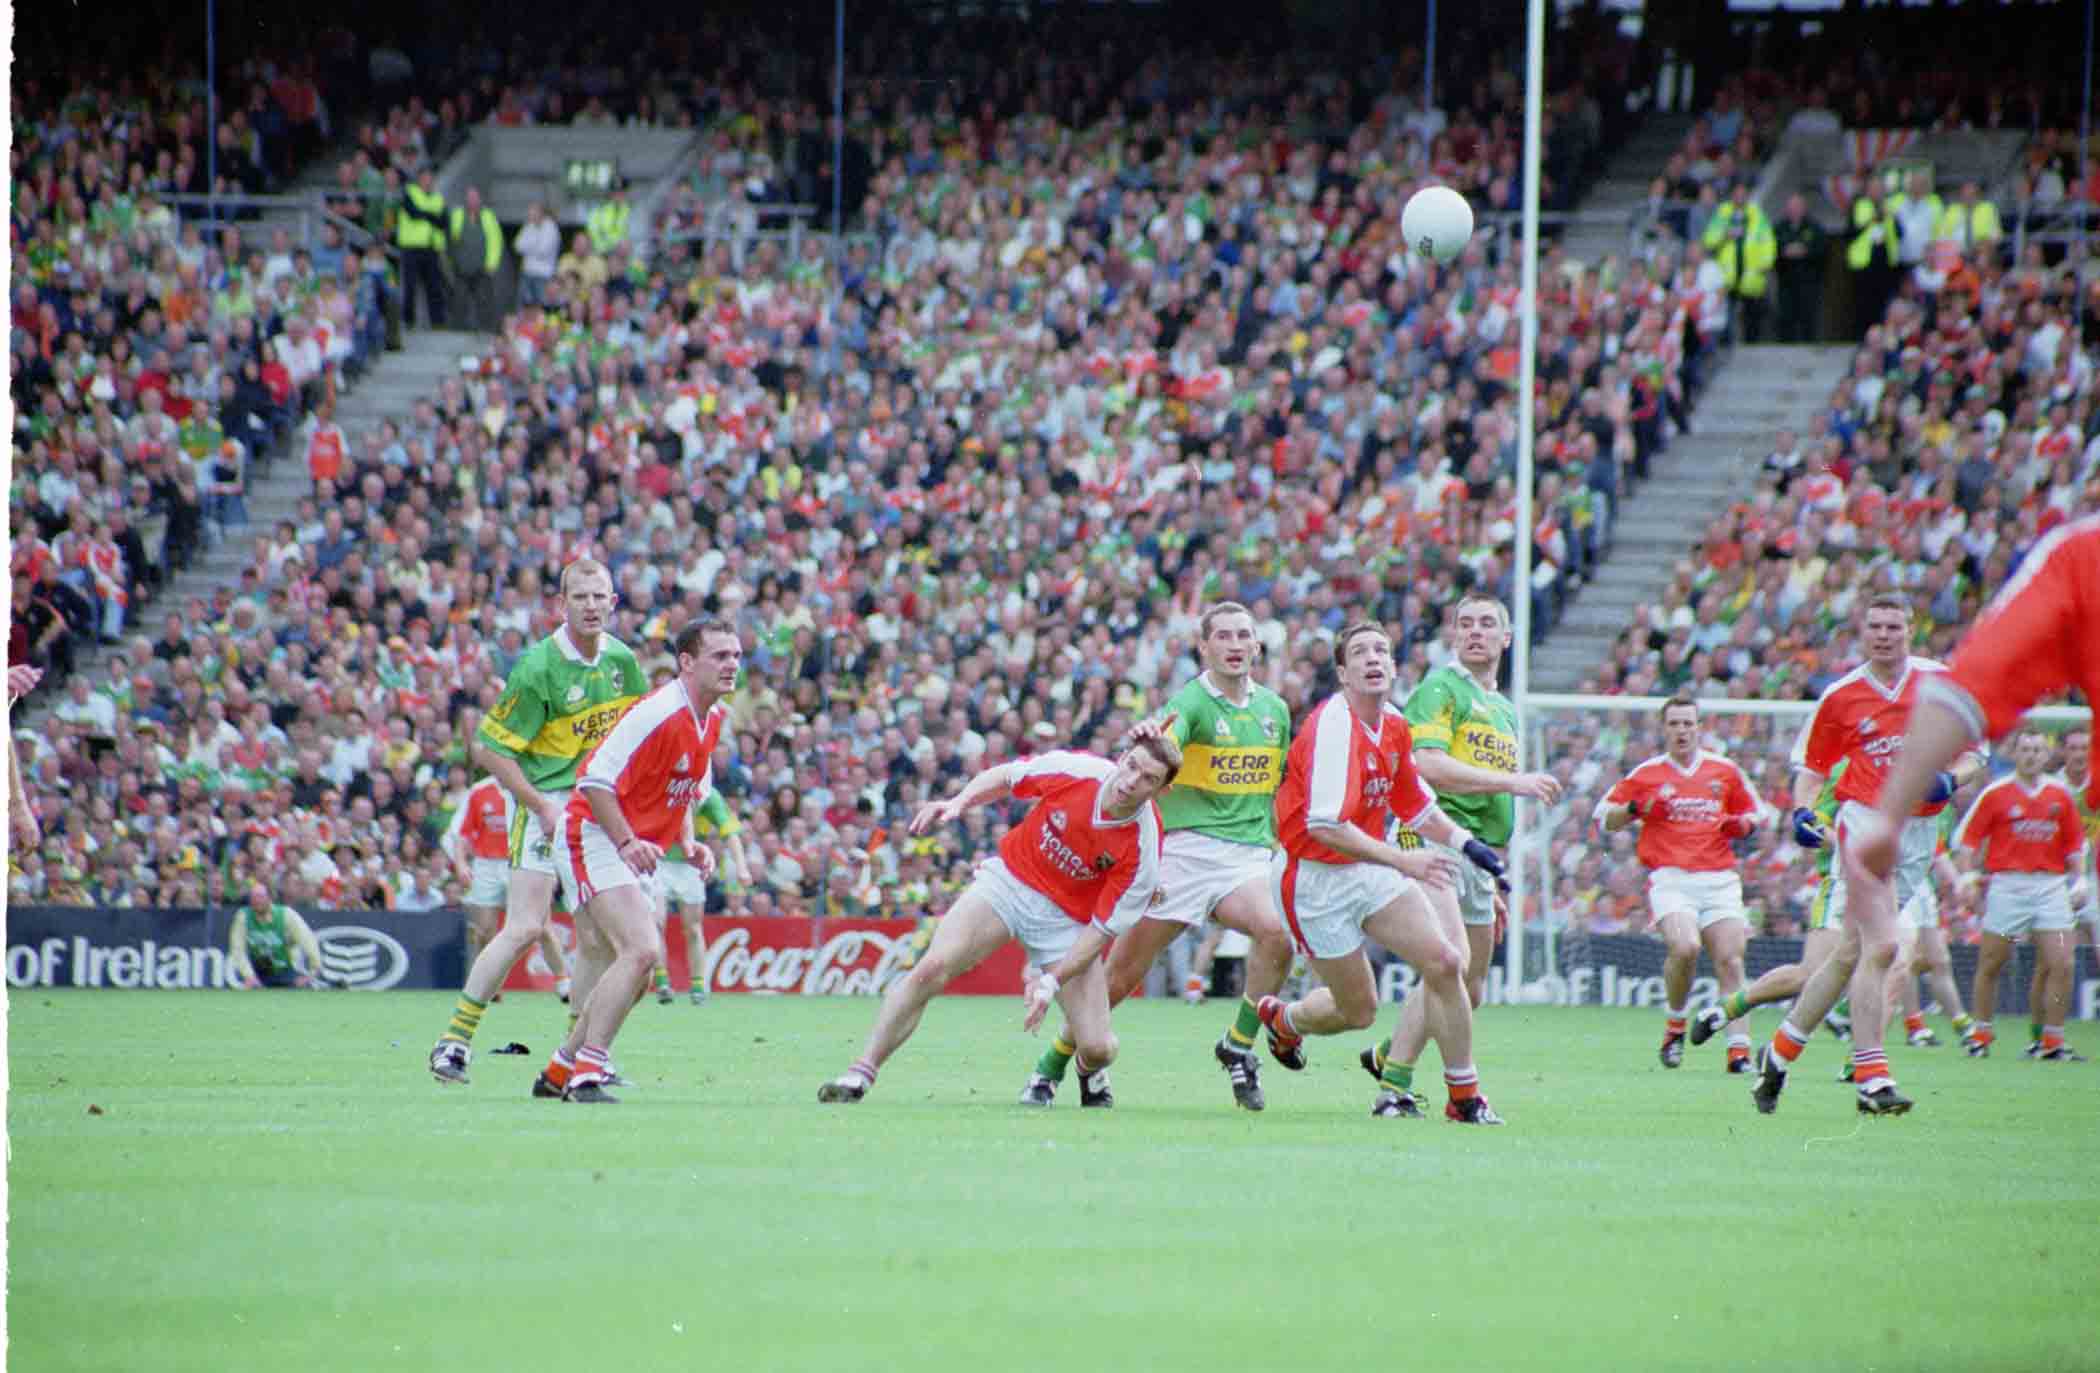 Armagh vs Kerry All Ireland final 2002